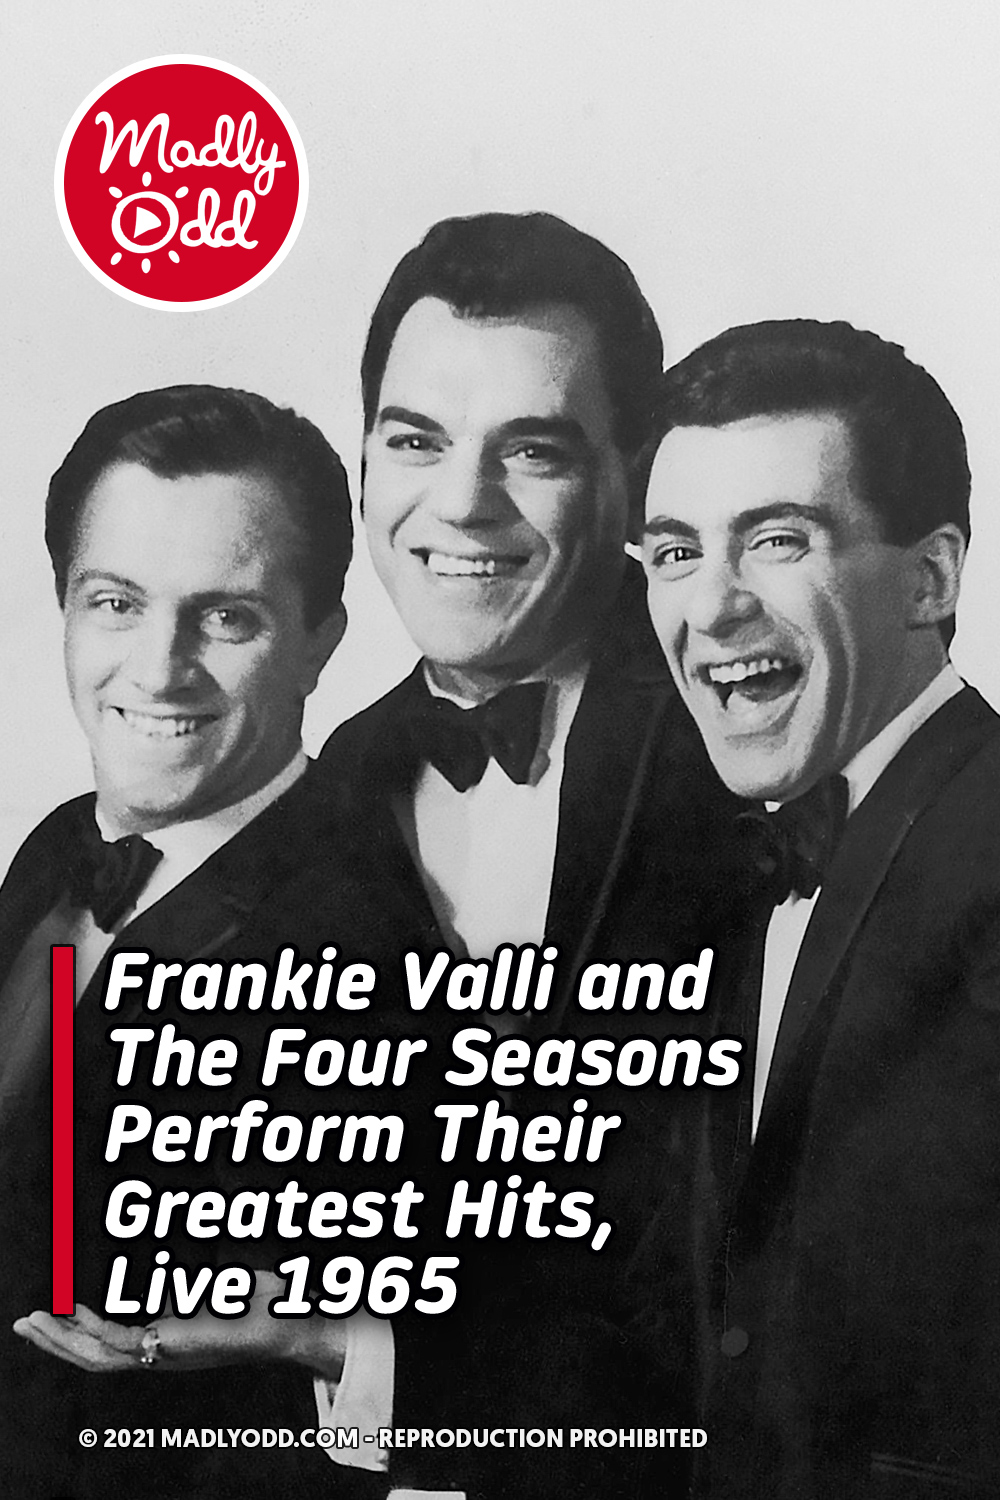 Frankie Valli and The Four Seasons Perform Their Greatest Hits, Live 1965